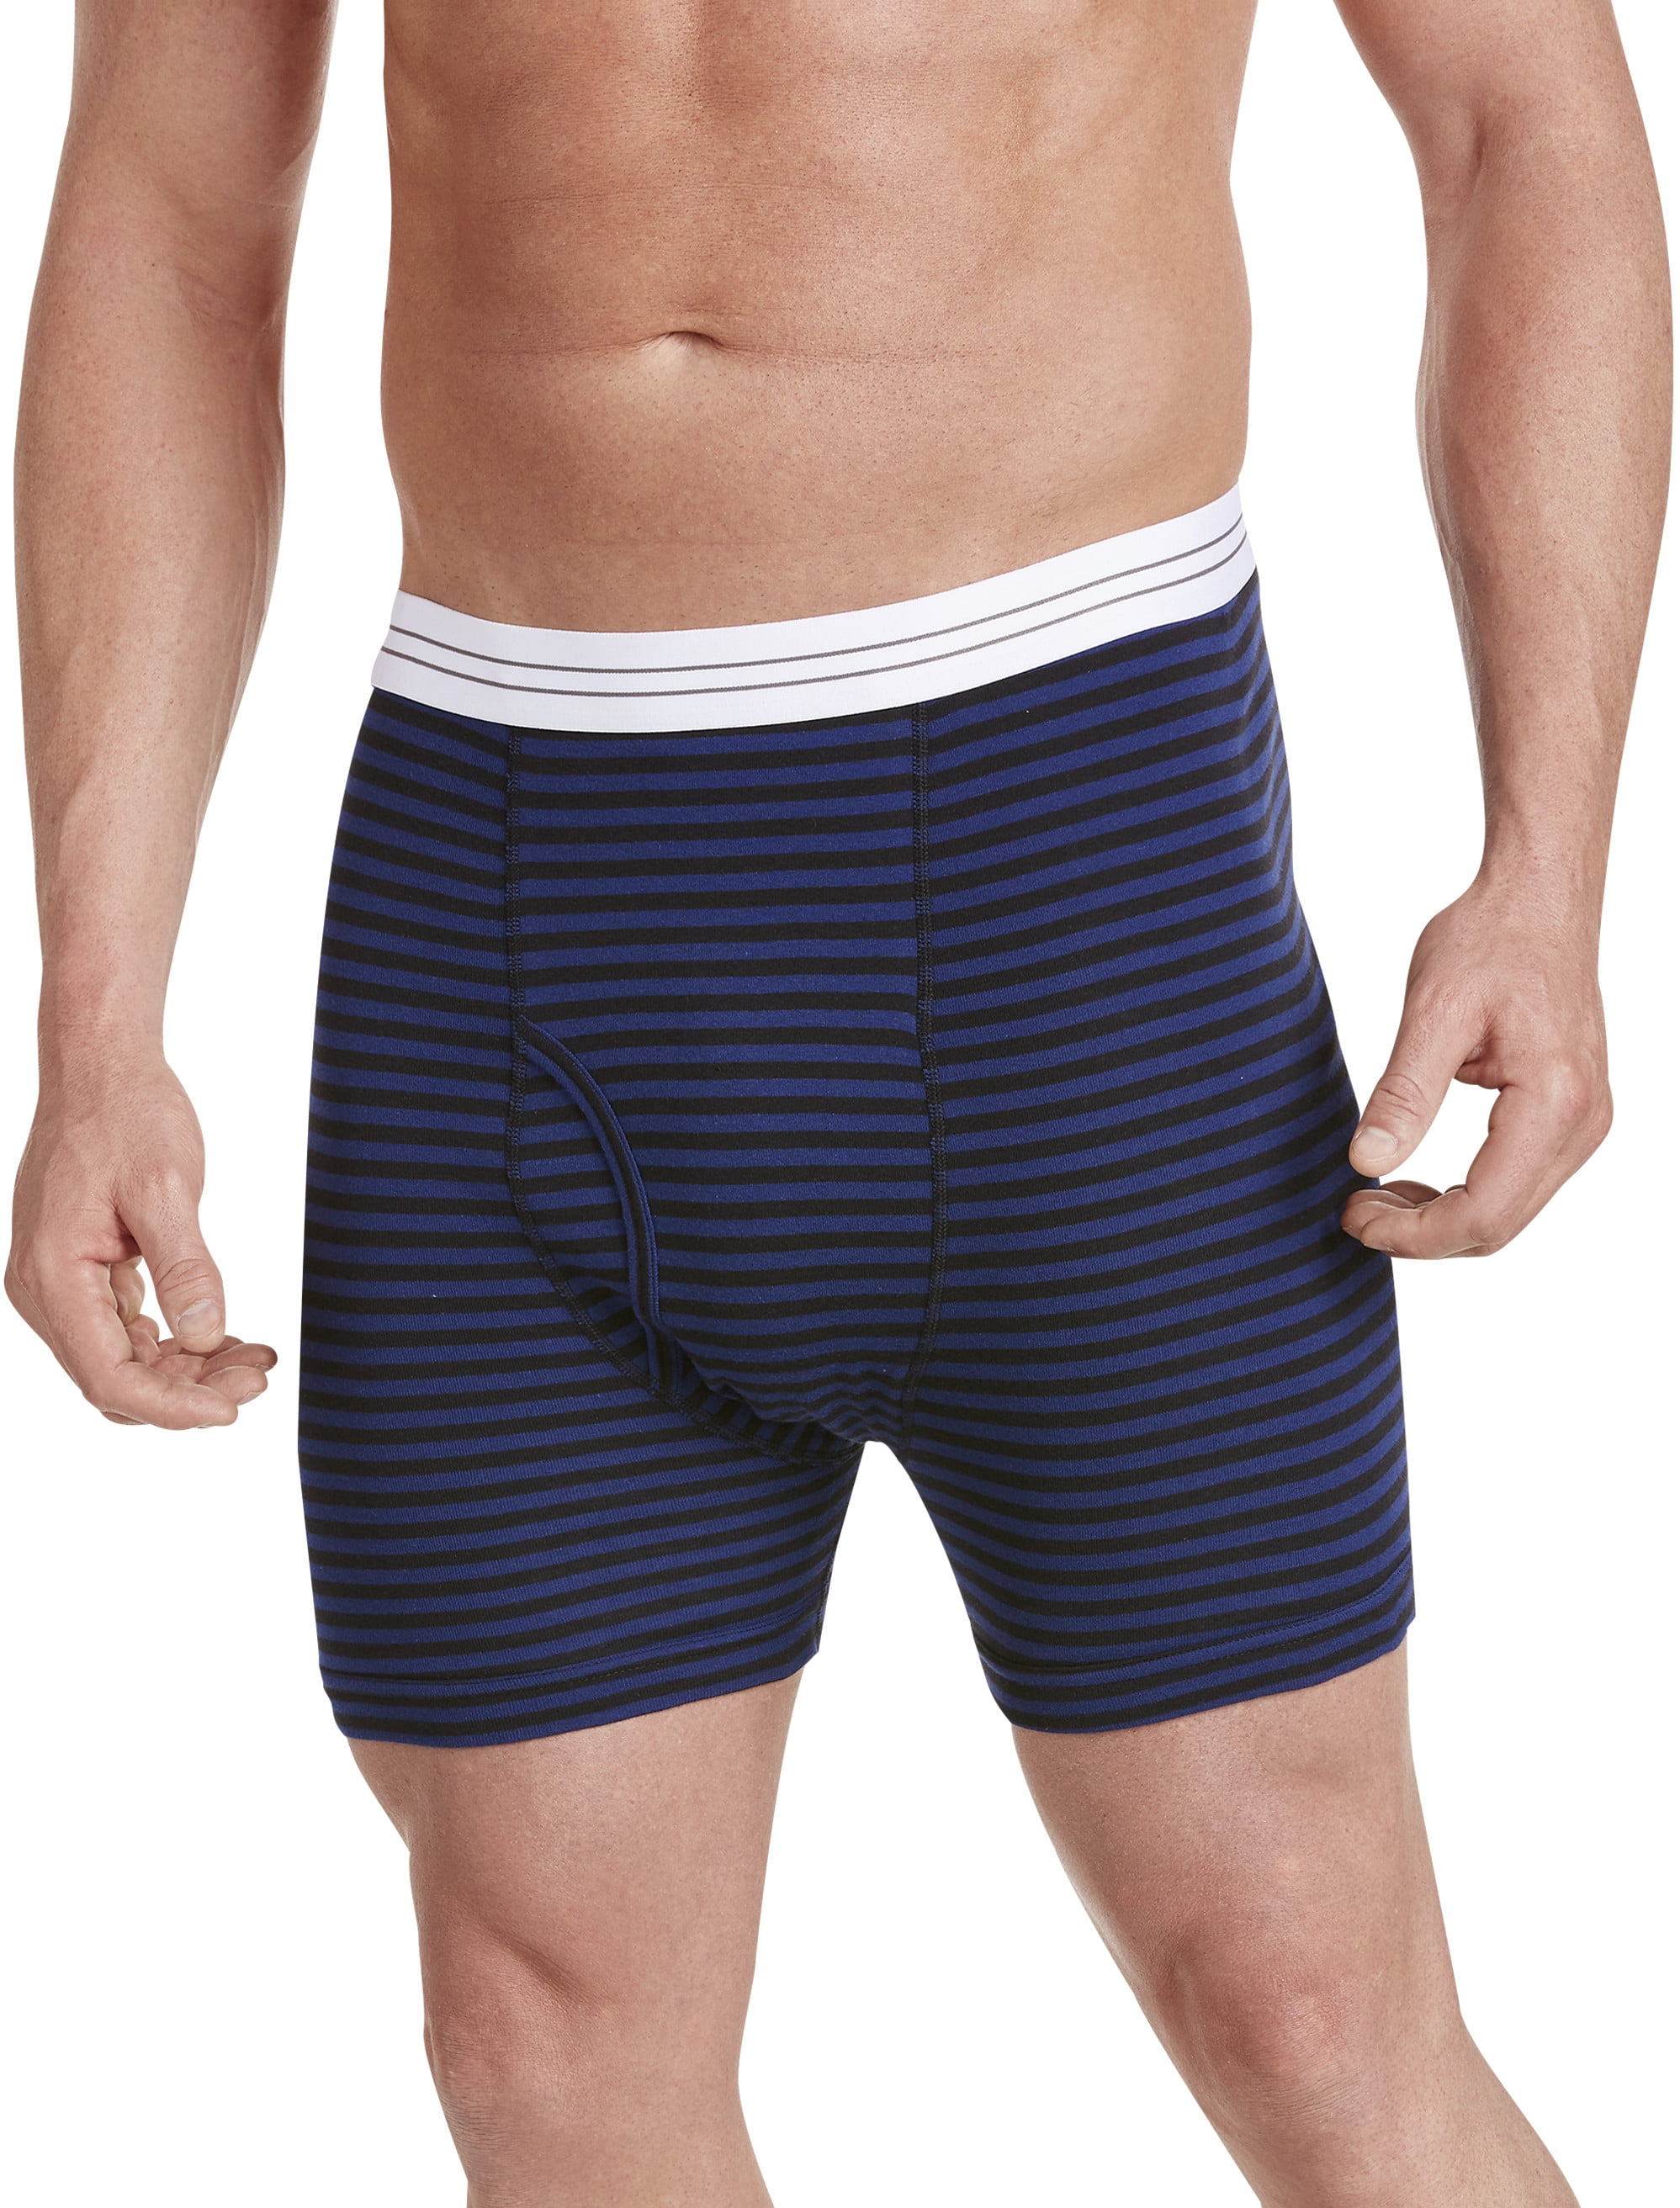 Harbor Bay by DXL Big and Tall Men's Assorted Boxer Briefs, Navy Stripe ...